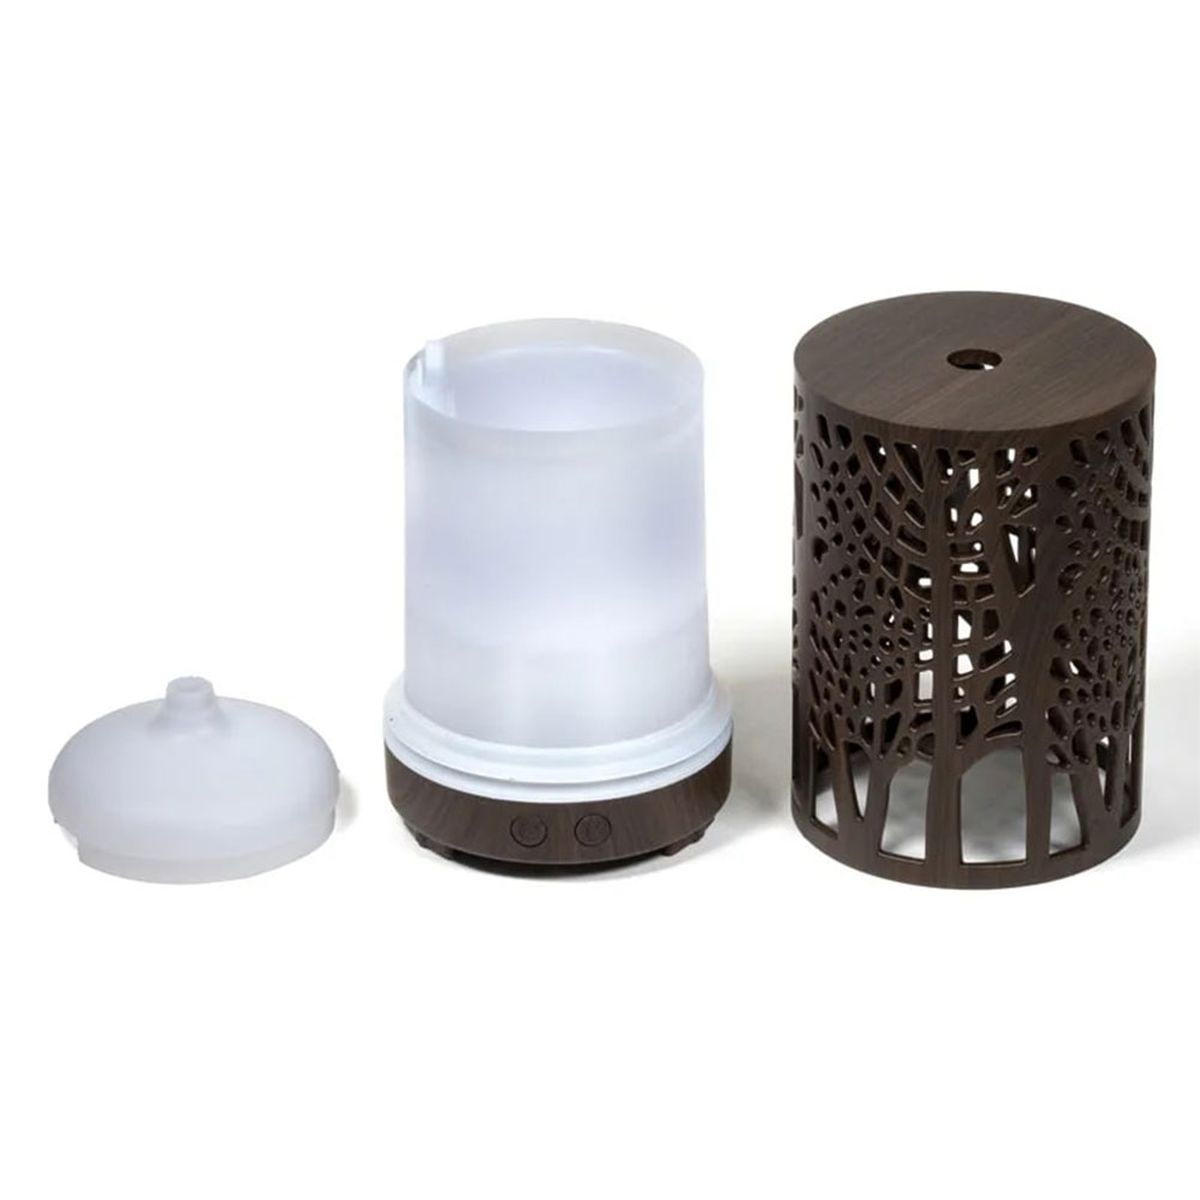 Ultrasonic aroma diffuser Zen Forest Brown